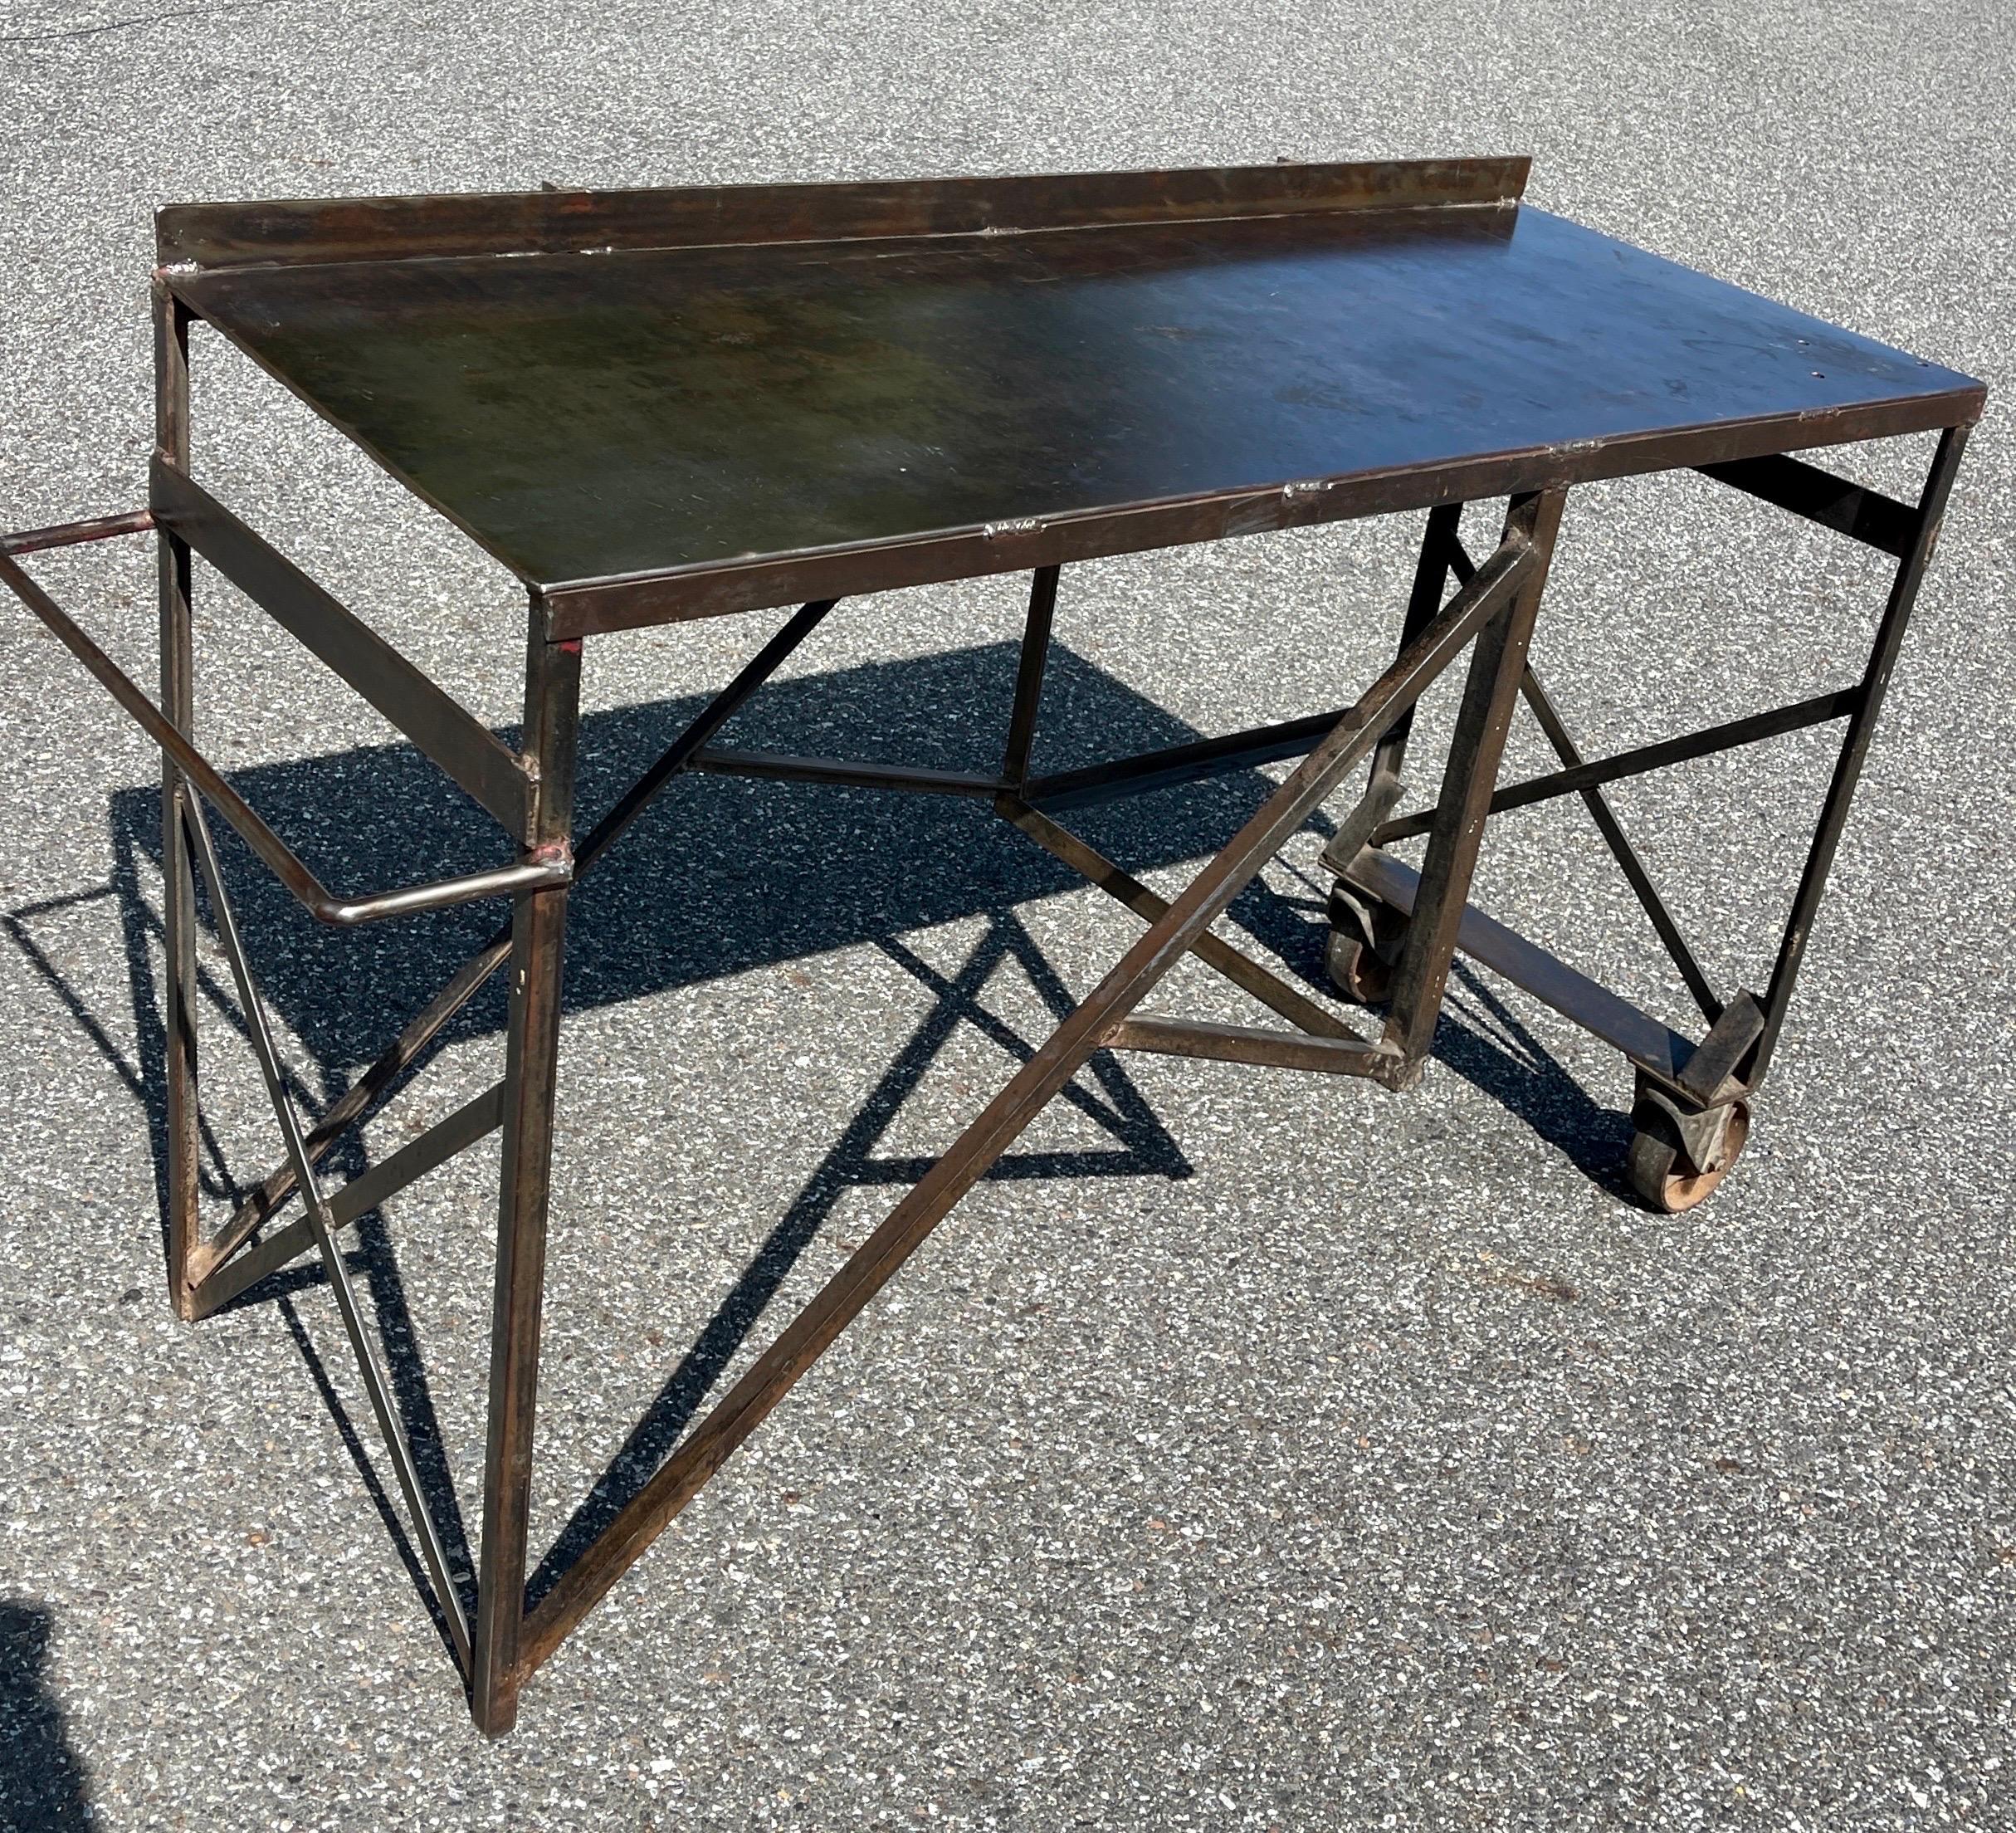 One of a Kind Industrial Work or Console Table, Mid-Century Modern 

Appealing and sturdy rolling work table on wheels. This vintage piece incorporates both form and function and is multifunctional as a work piece, desk, console piece suitable as a